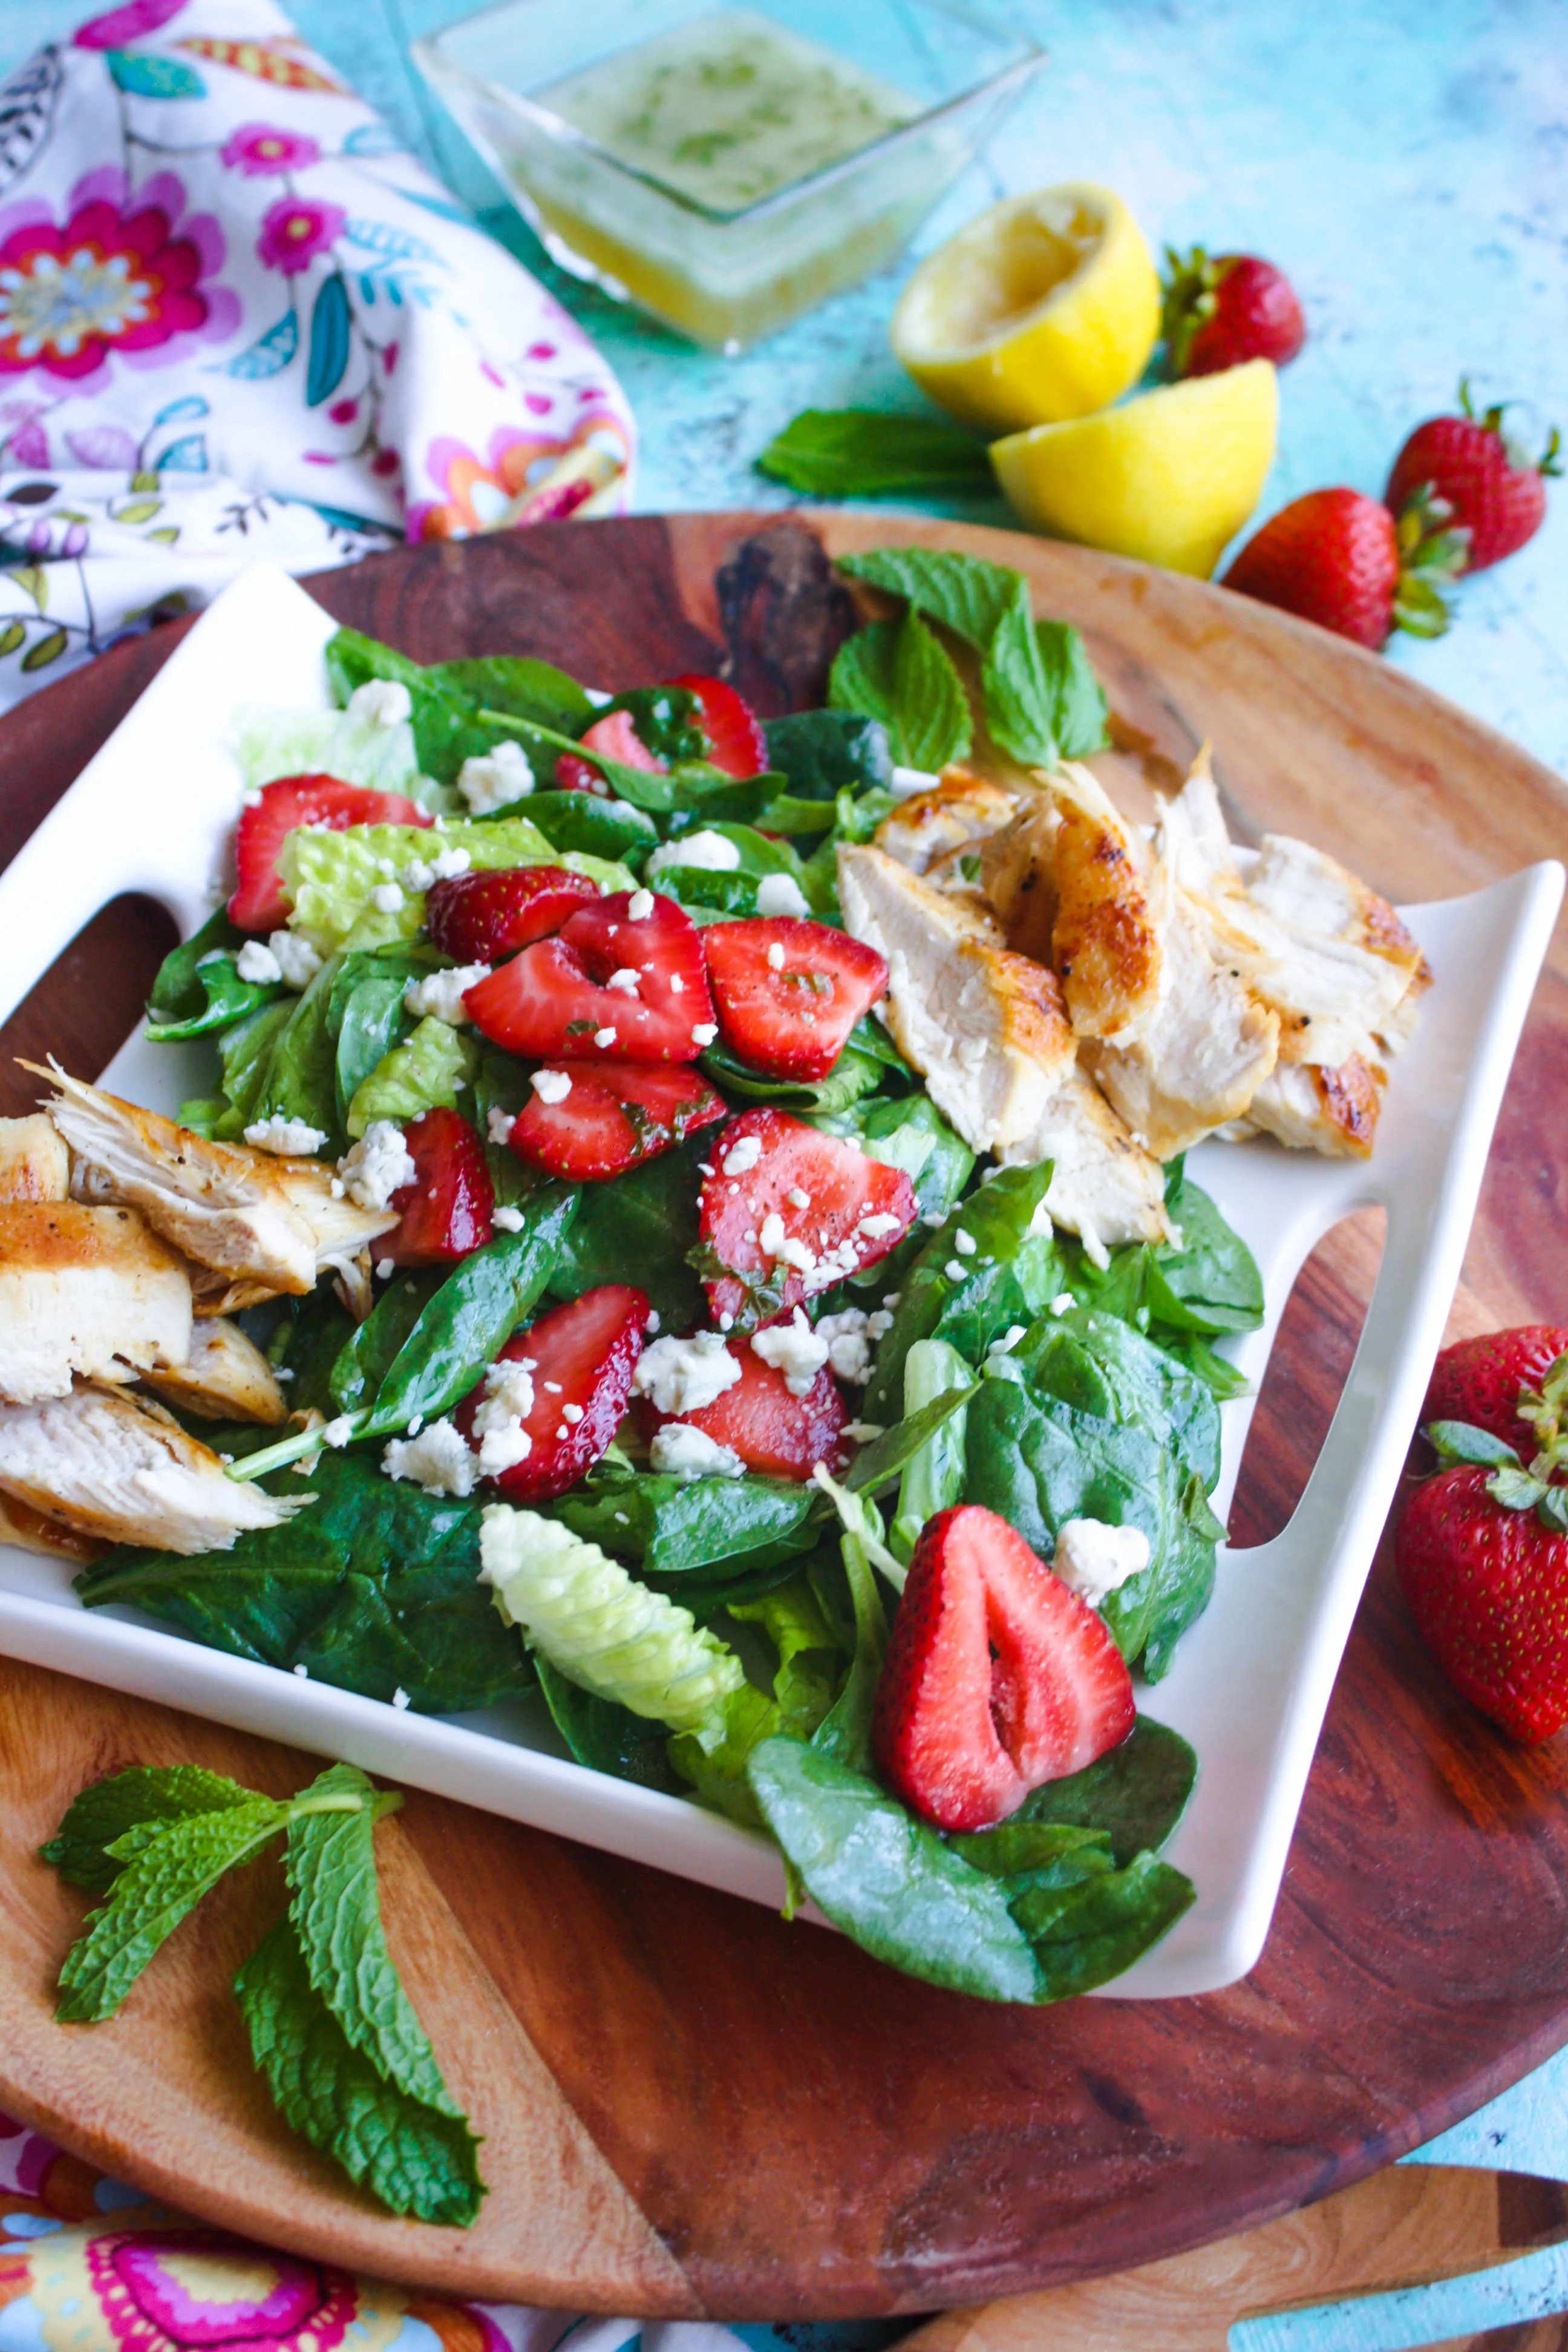 Chicken Salad with Strawberries and Honey-Lemon Mint Dressing is a fabulous, no-fuss meal. You'll love the touch of sweetness from the strawberries and the lemon.